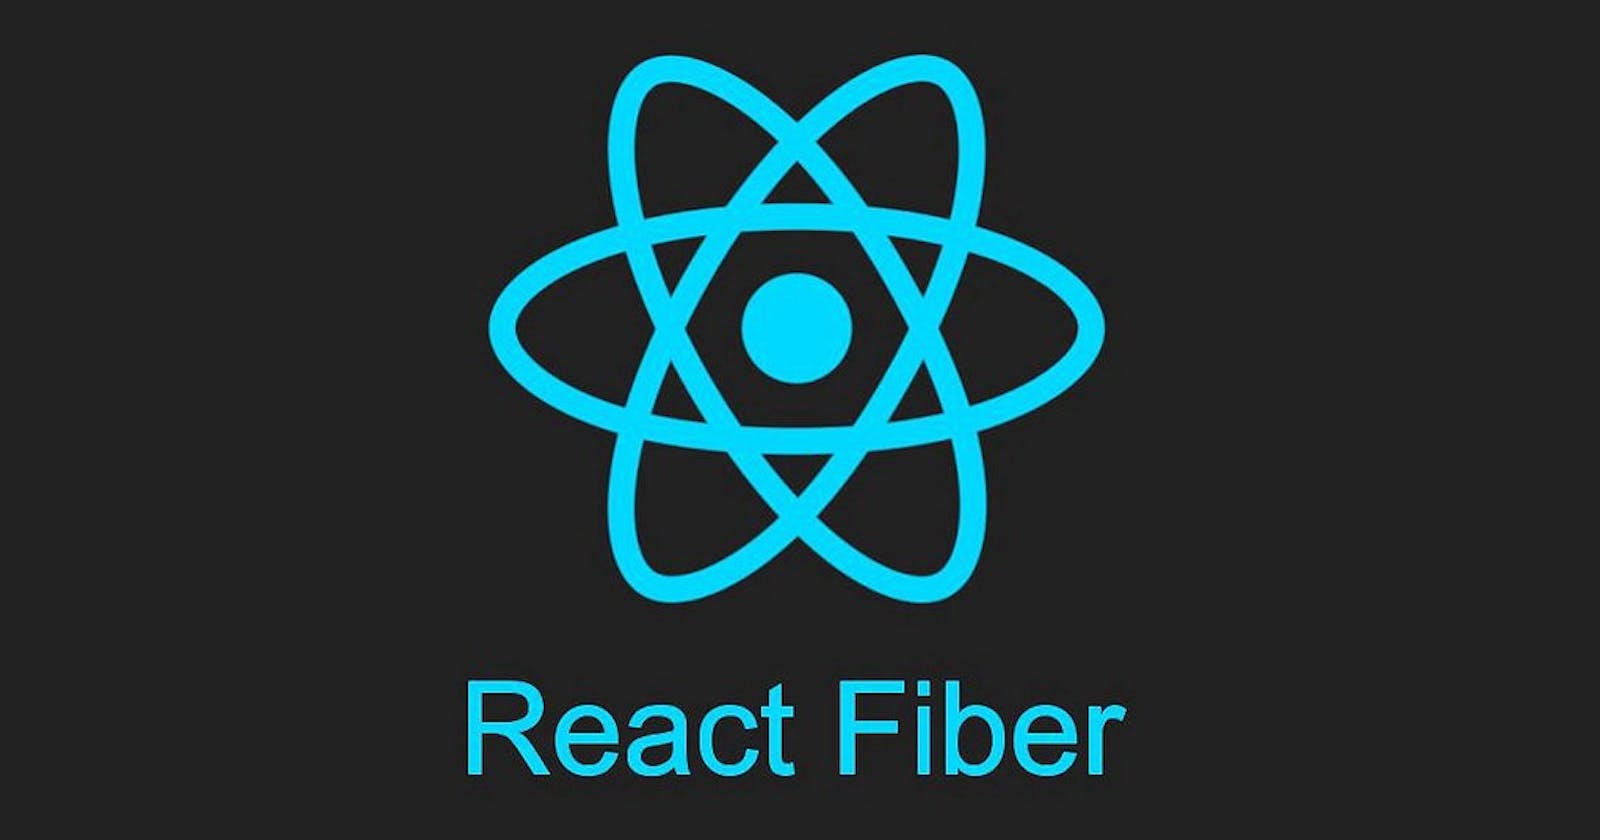 What is react fiber and how it works?